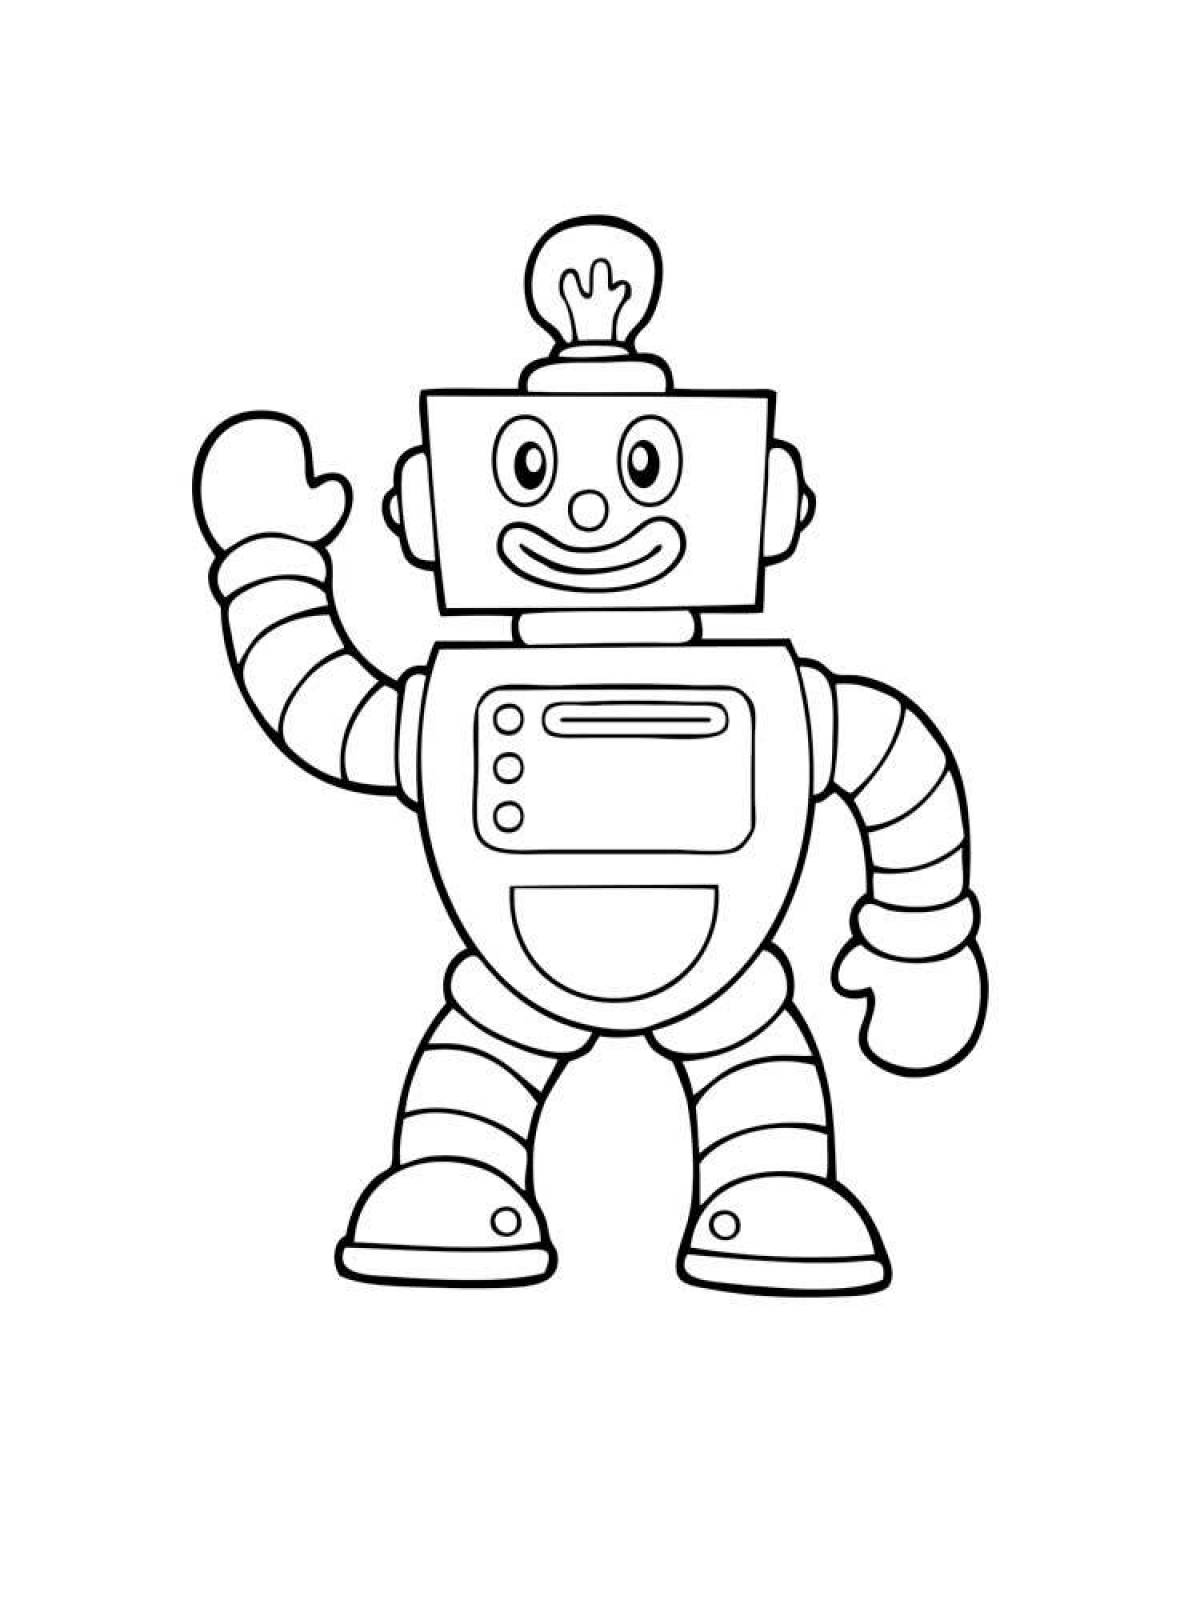 Colored robot coloring book for kids